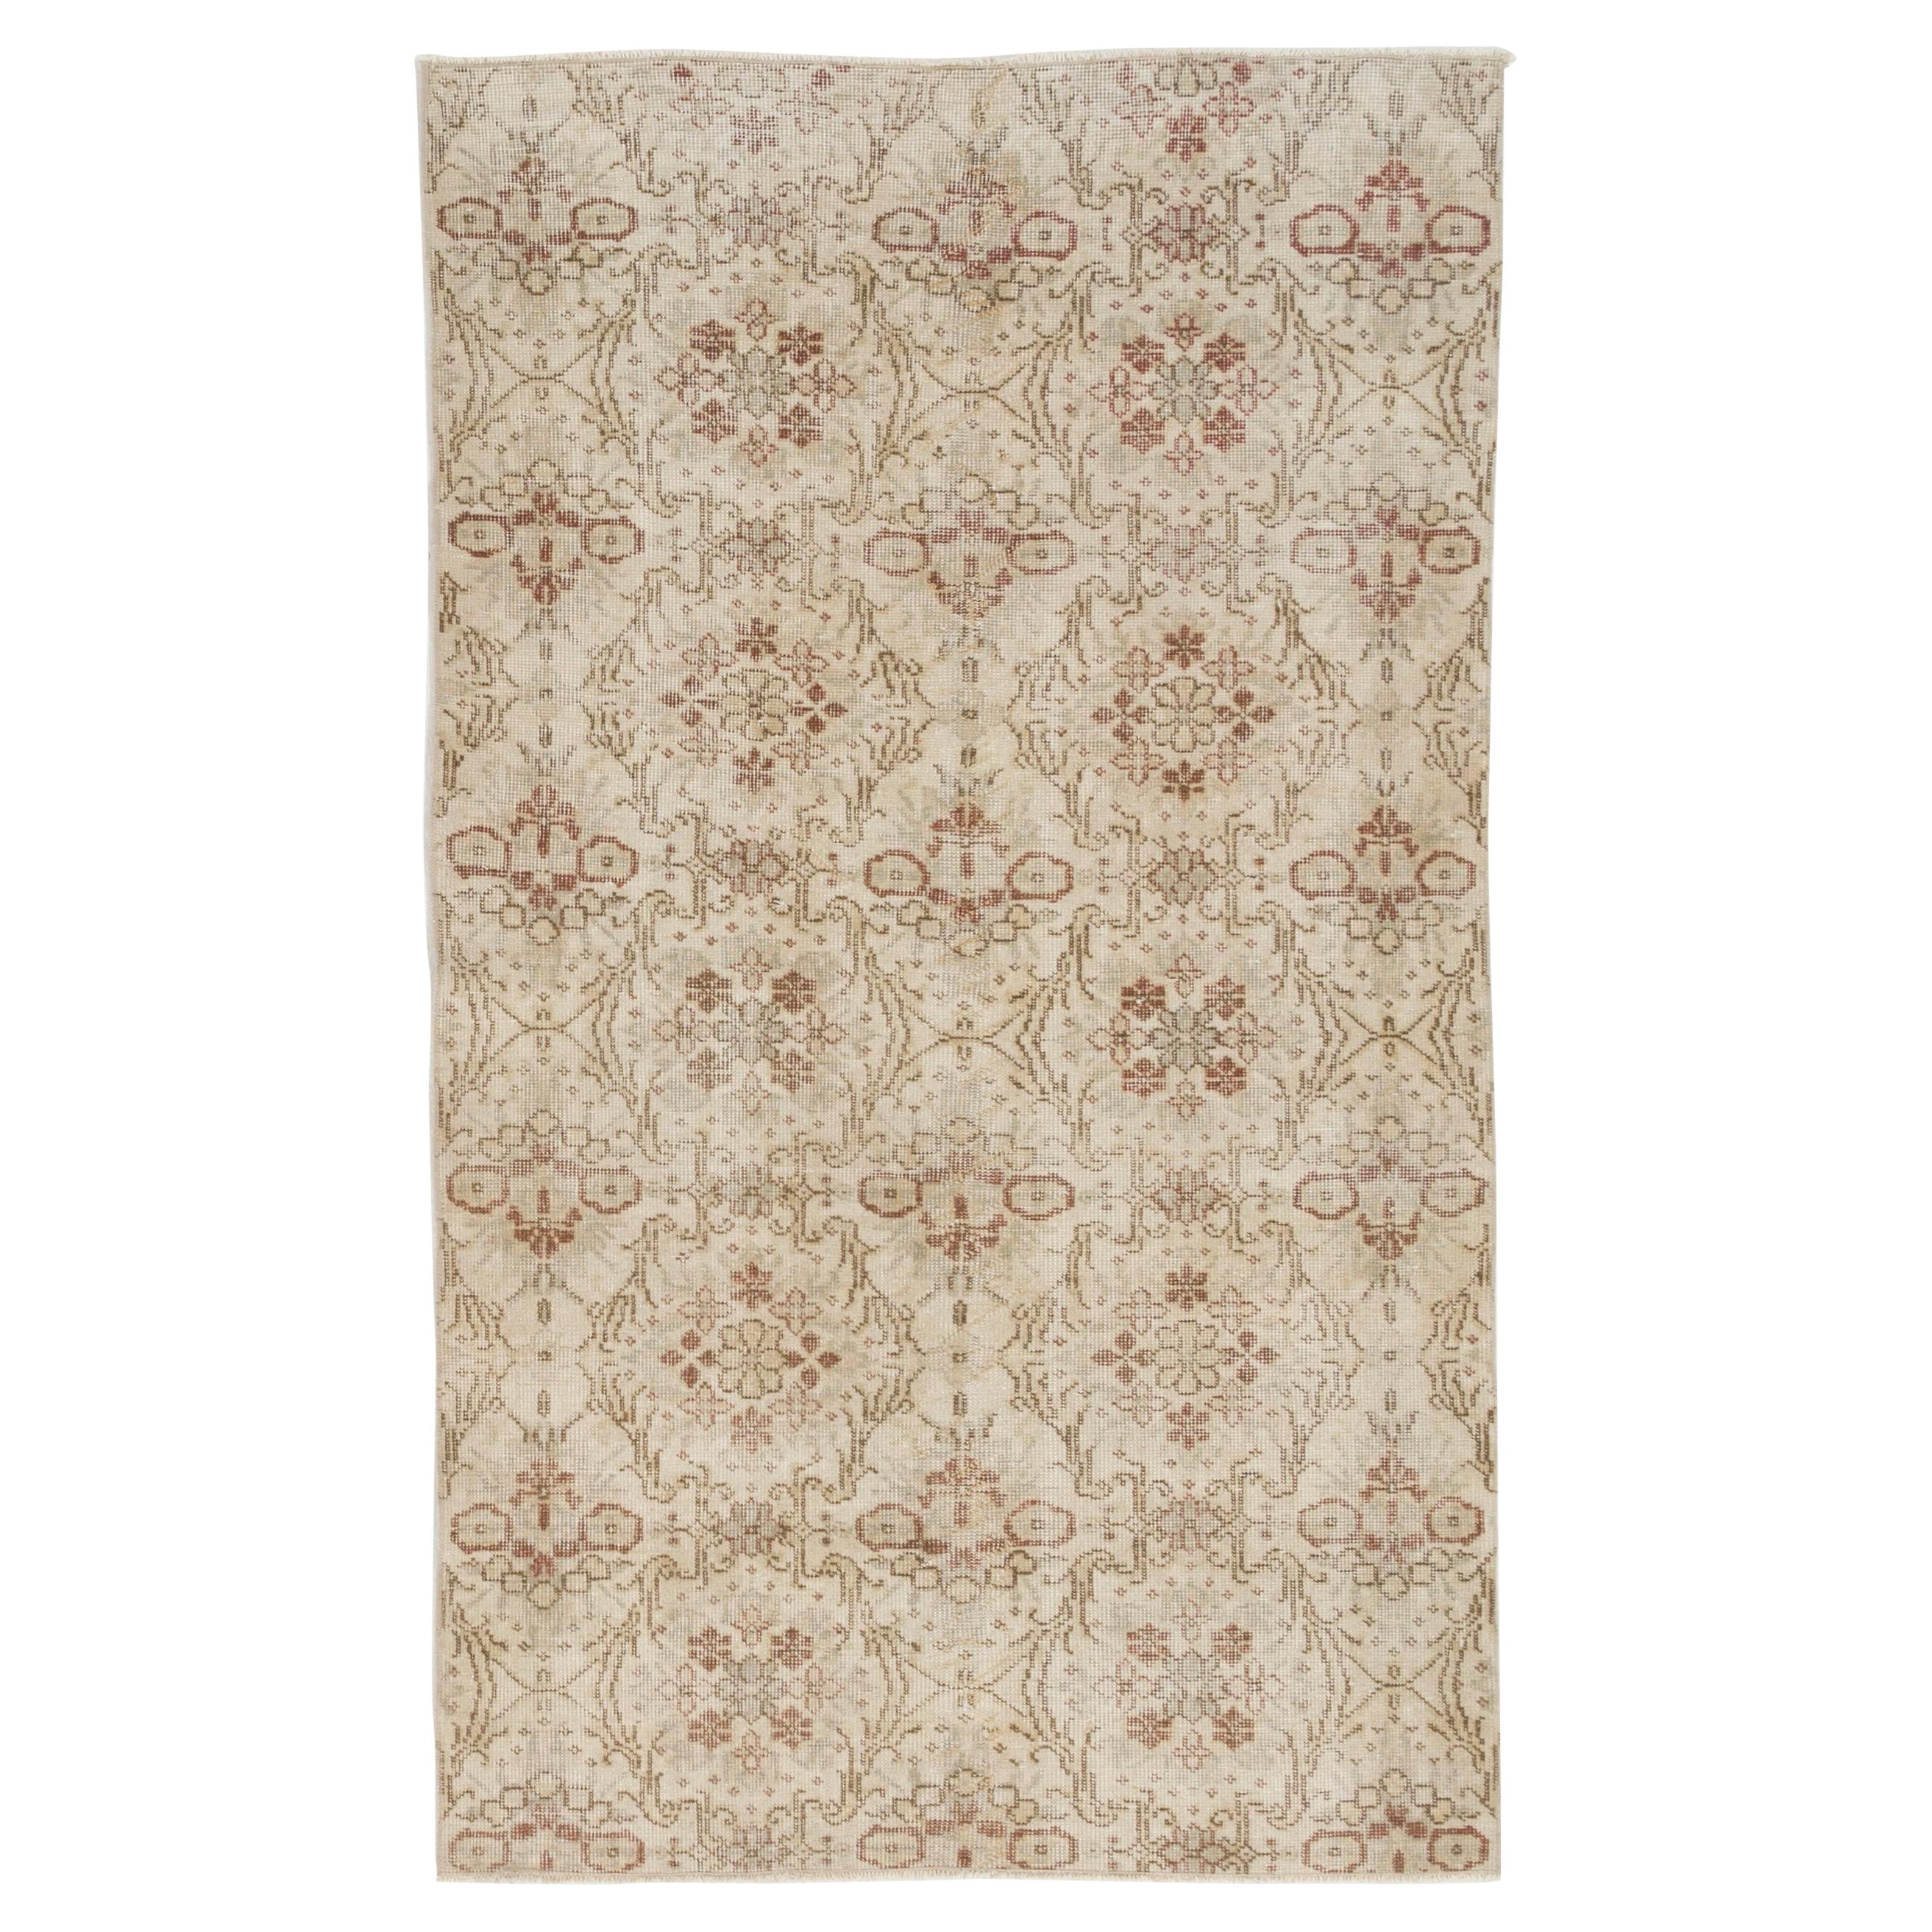 4x6.8 ft Hand-Knotted Vintage Turkish Oushak Accent Rug with Floral Design